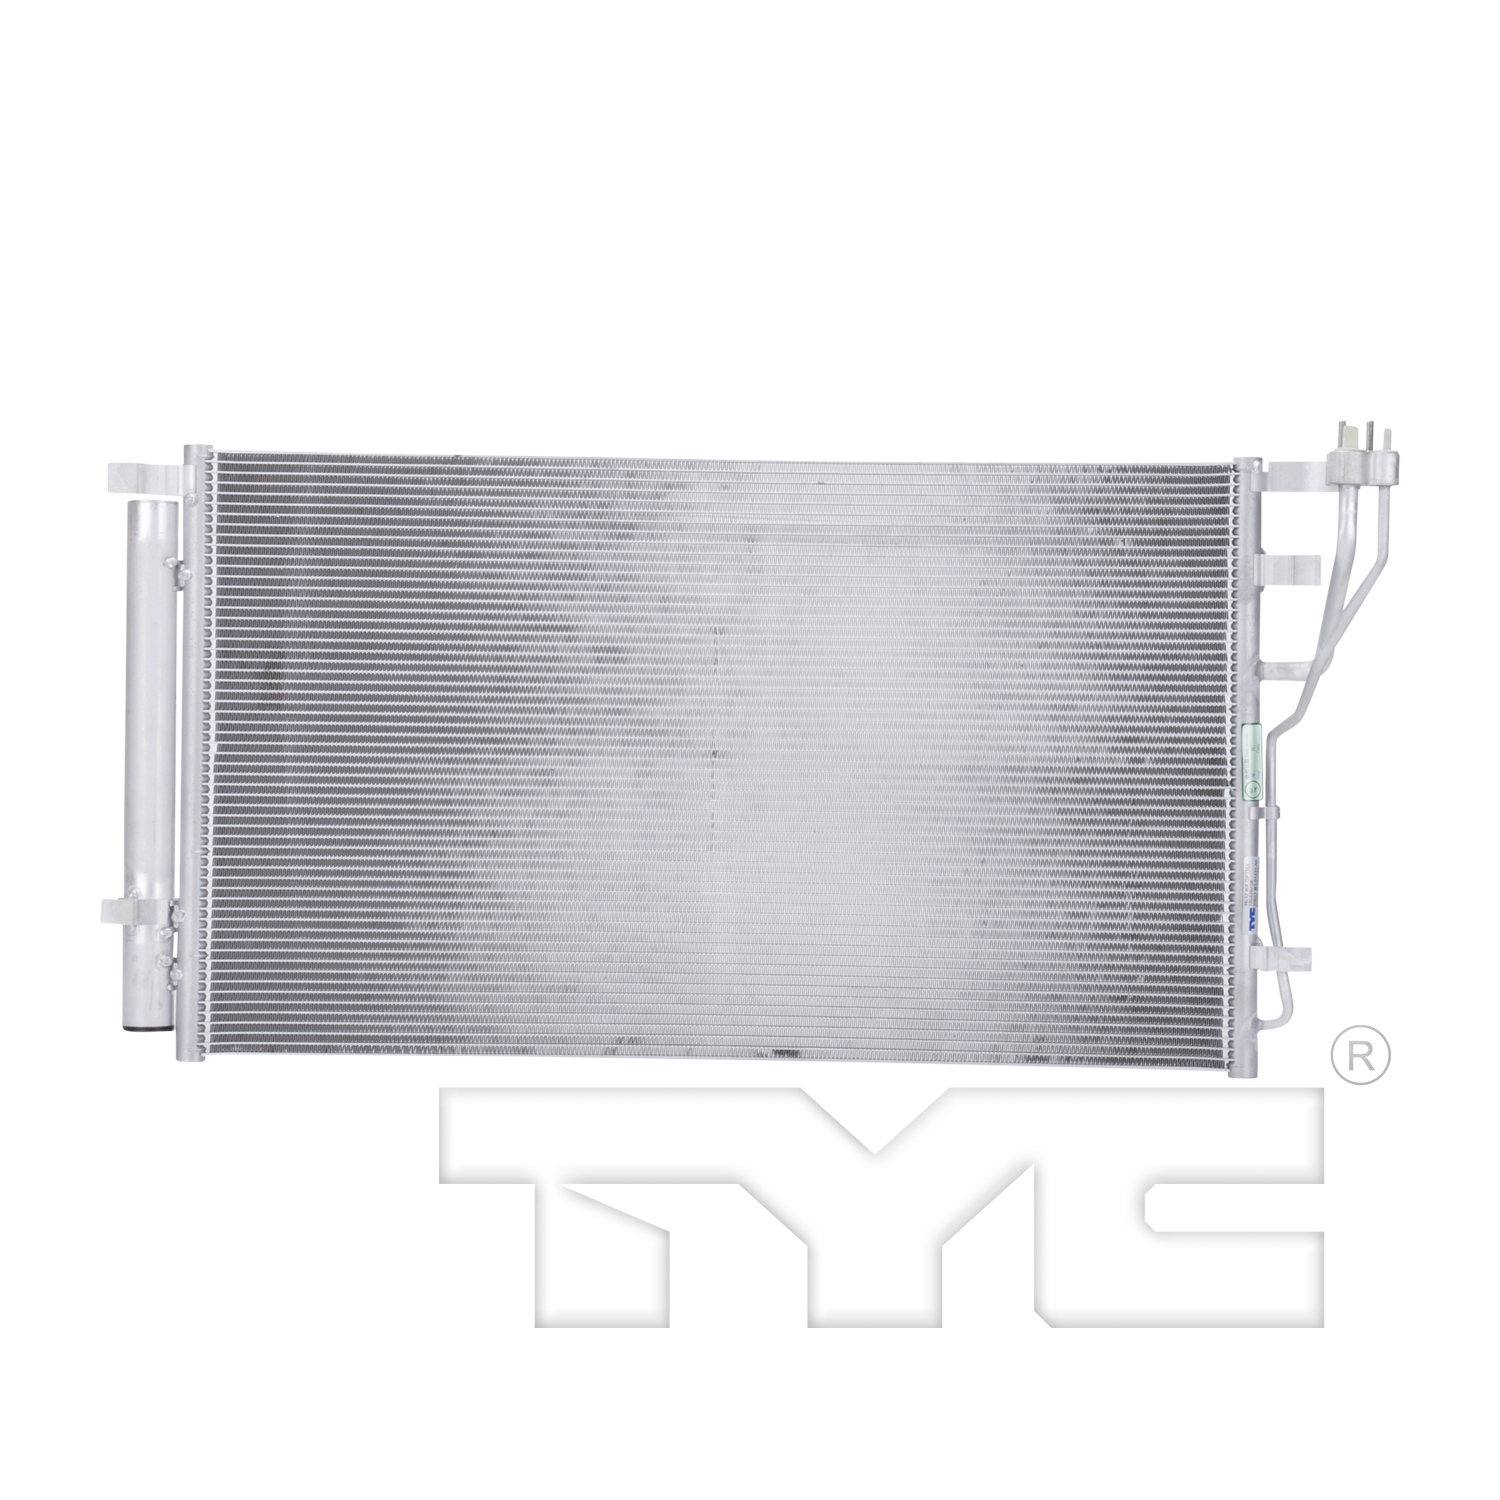 Aftermarket AC CONDENSERS for KIA - OPTIMA, OPTIMA,16-16,Air conditioning condenser